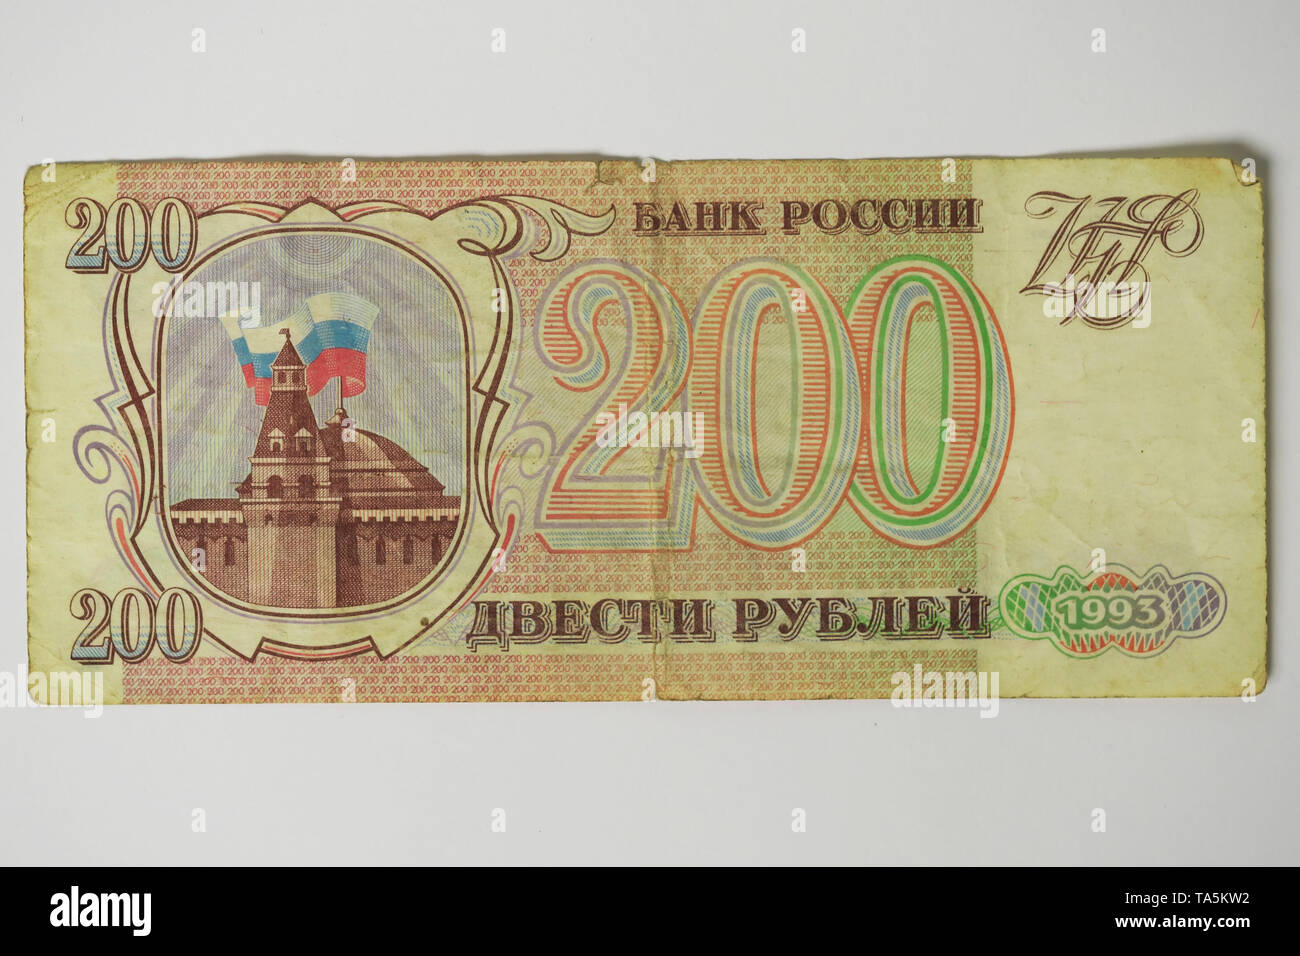 Treasury card of the National Bank of Russia worth two hundred rubles, second-hand, paper money close-up Stock Photo